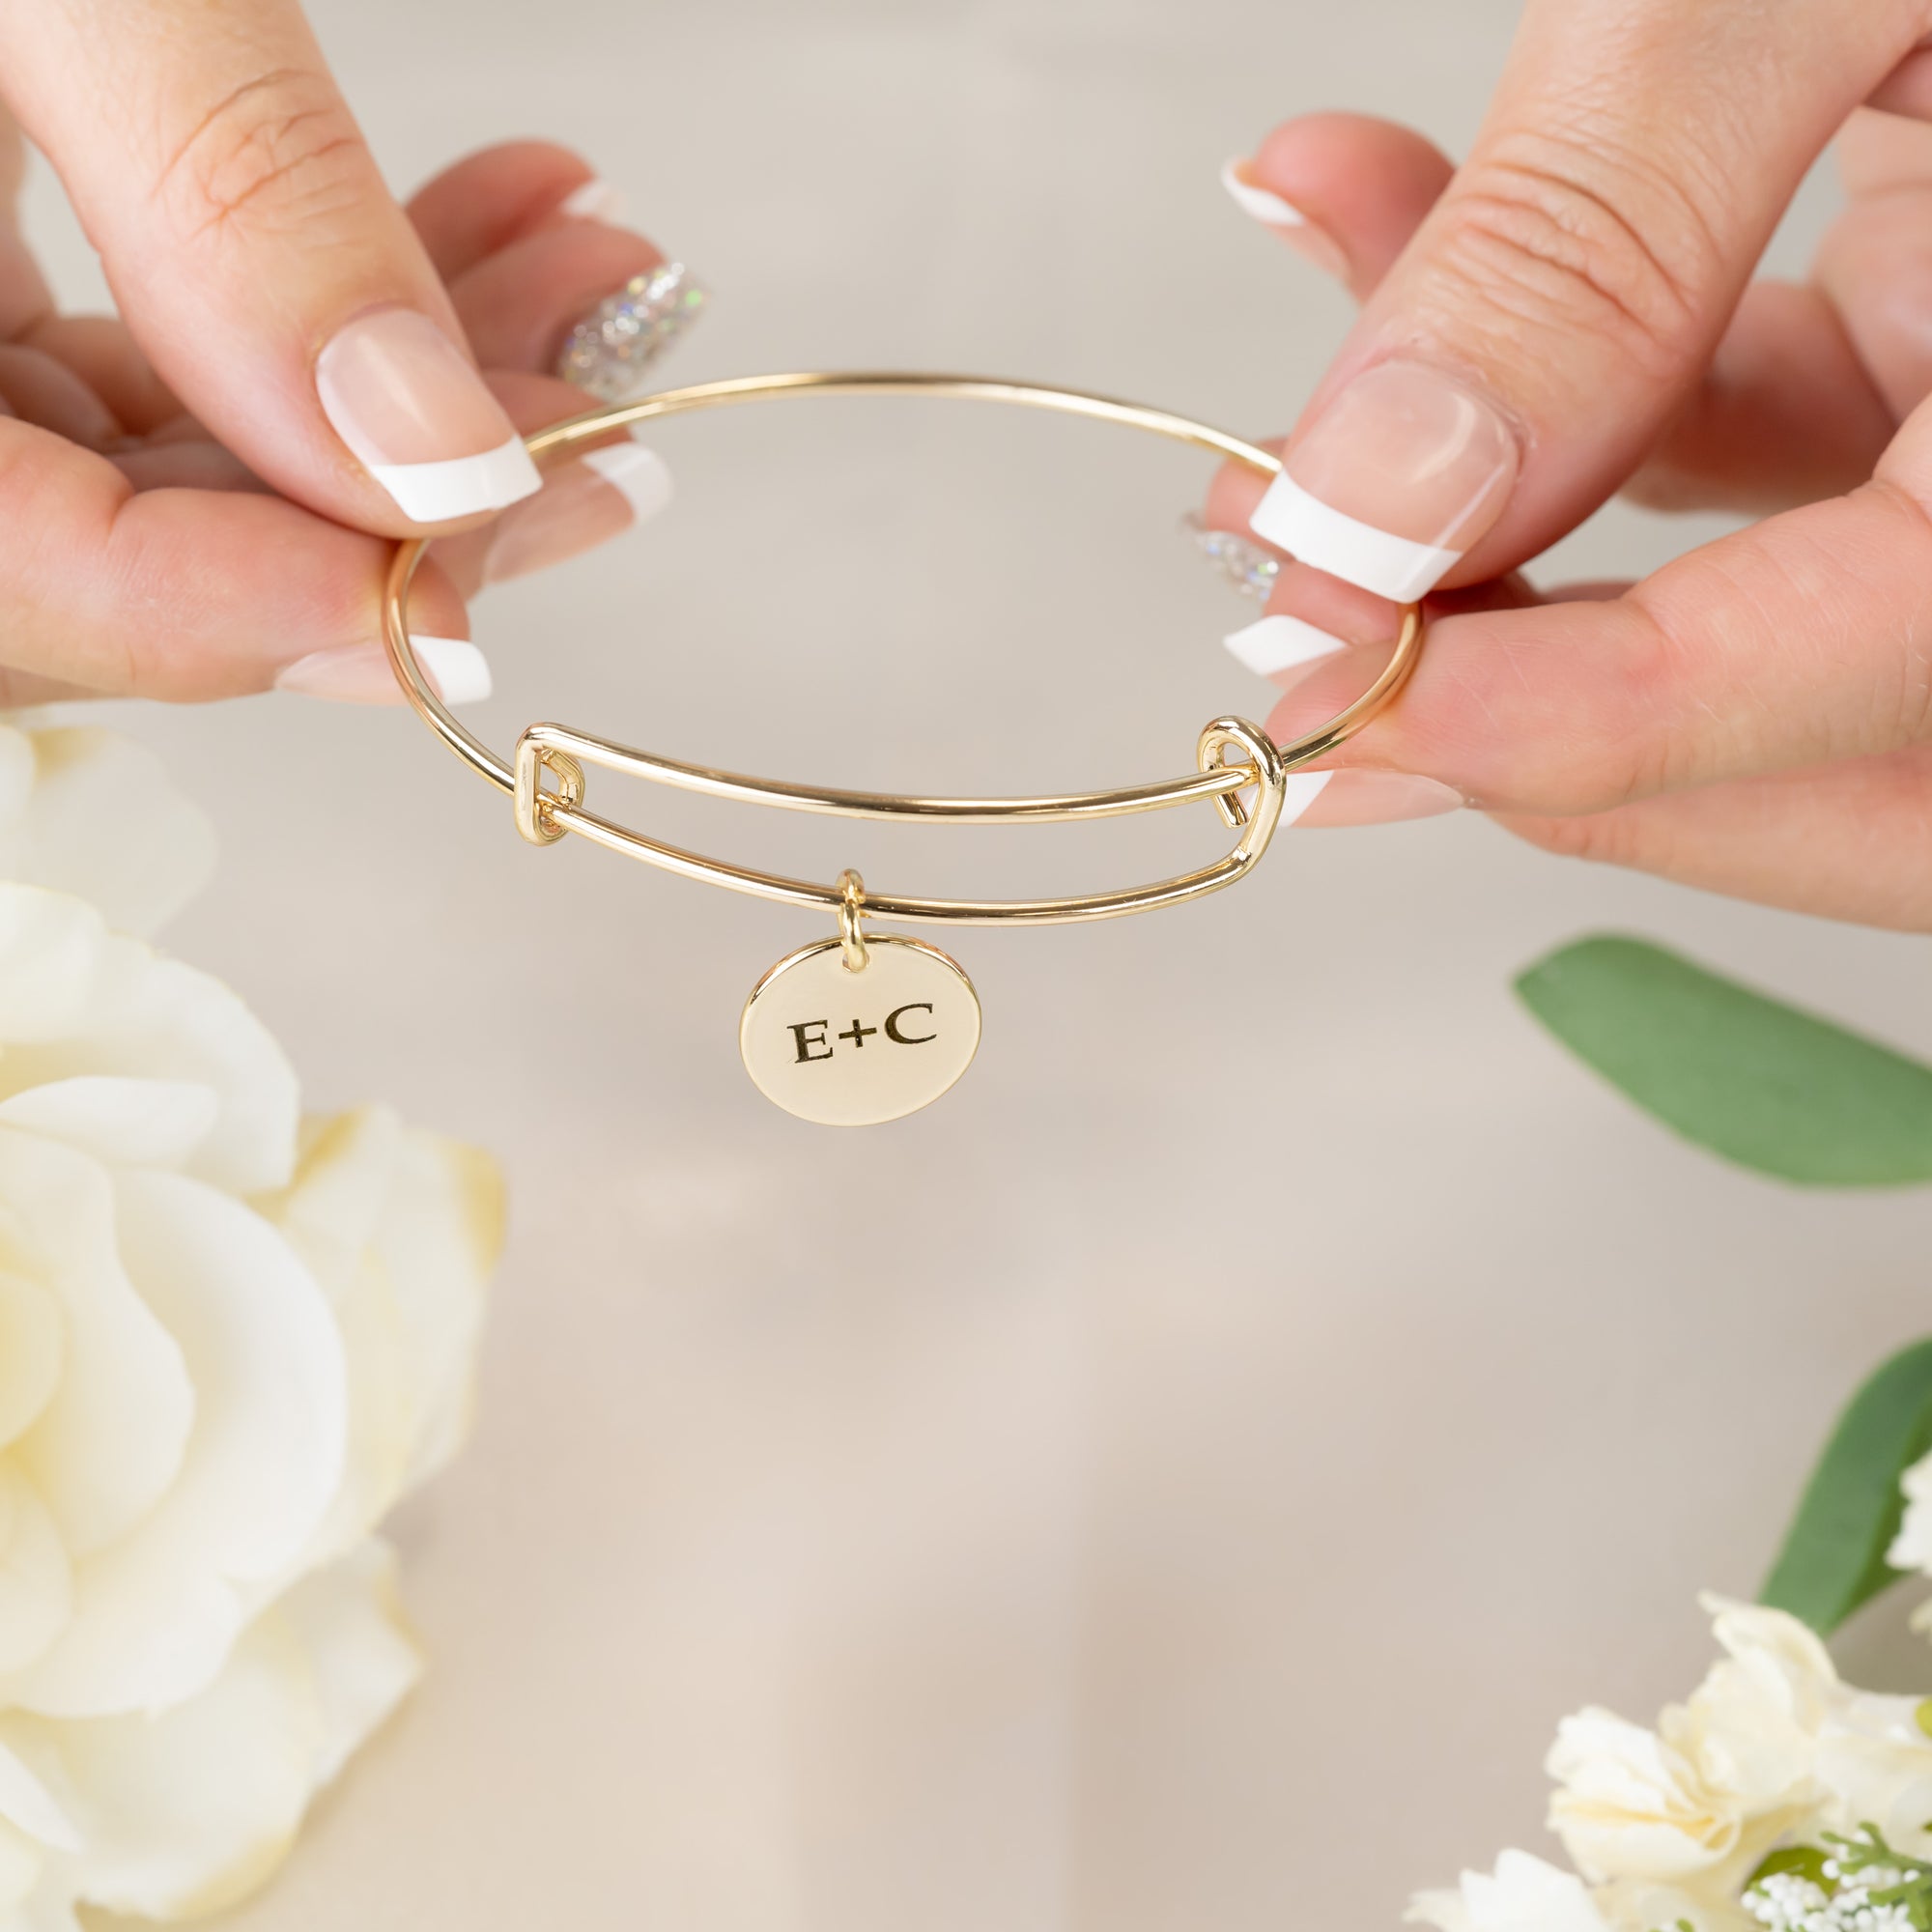 Amazon.com: Precious Pieces Personalized Sterling Silver Bangle Bracelet,  Custom Jewelry with Engraved Name Gift for Women (Adult-Large): Clothing,  Shoes & Jewelry